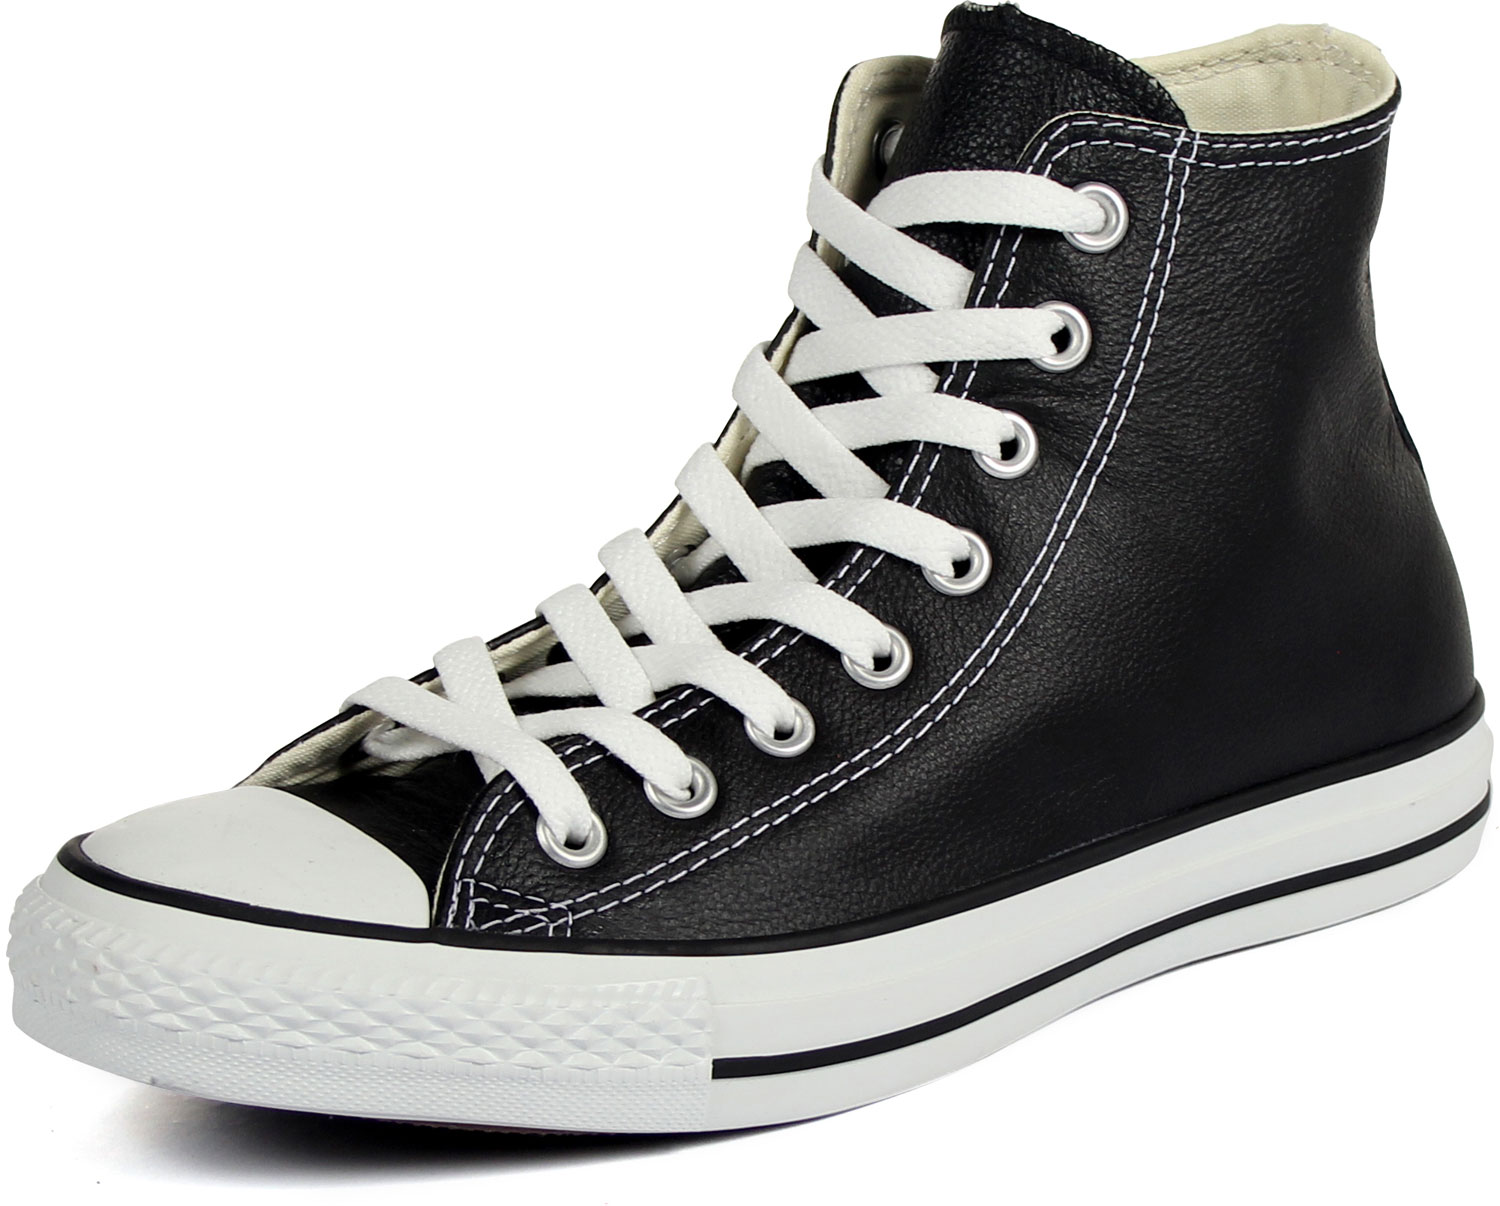 Converse Chuck Taylor All Star Shoes (1S581) Hi Black Leather